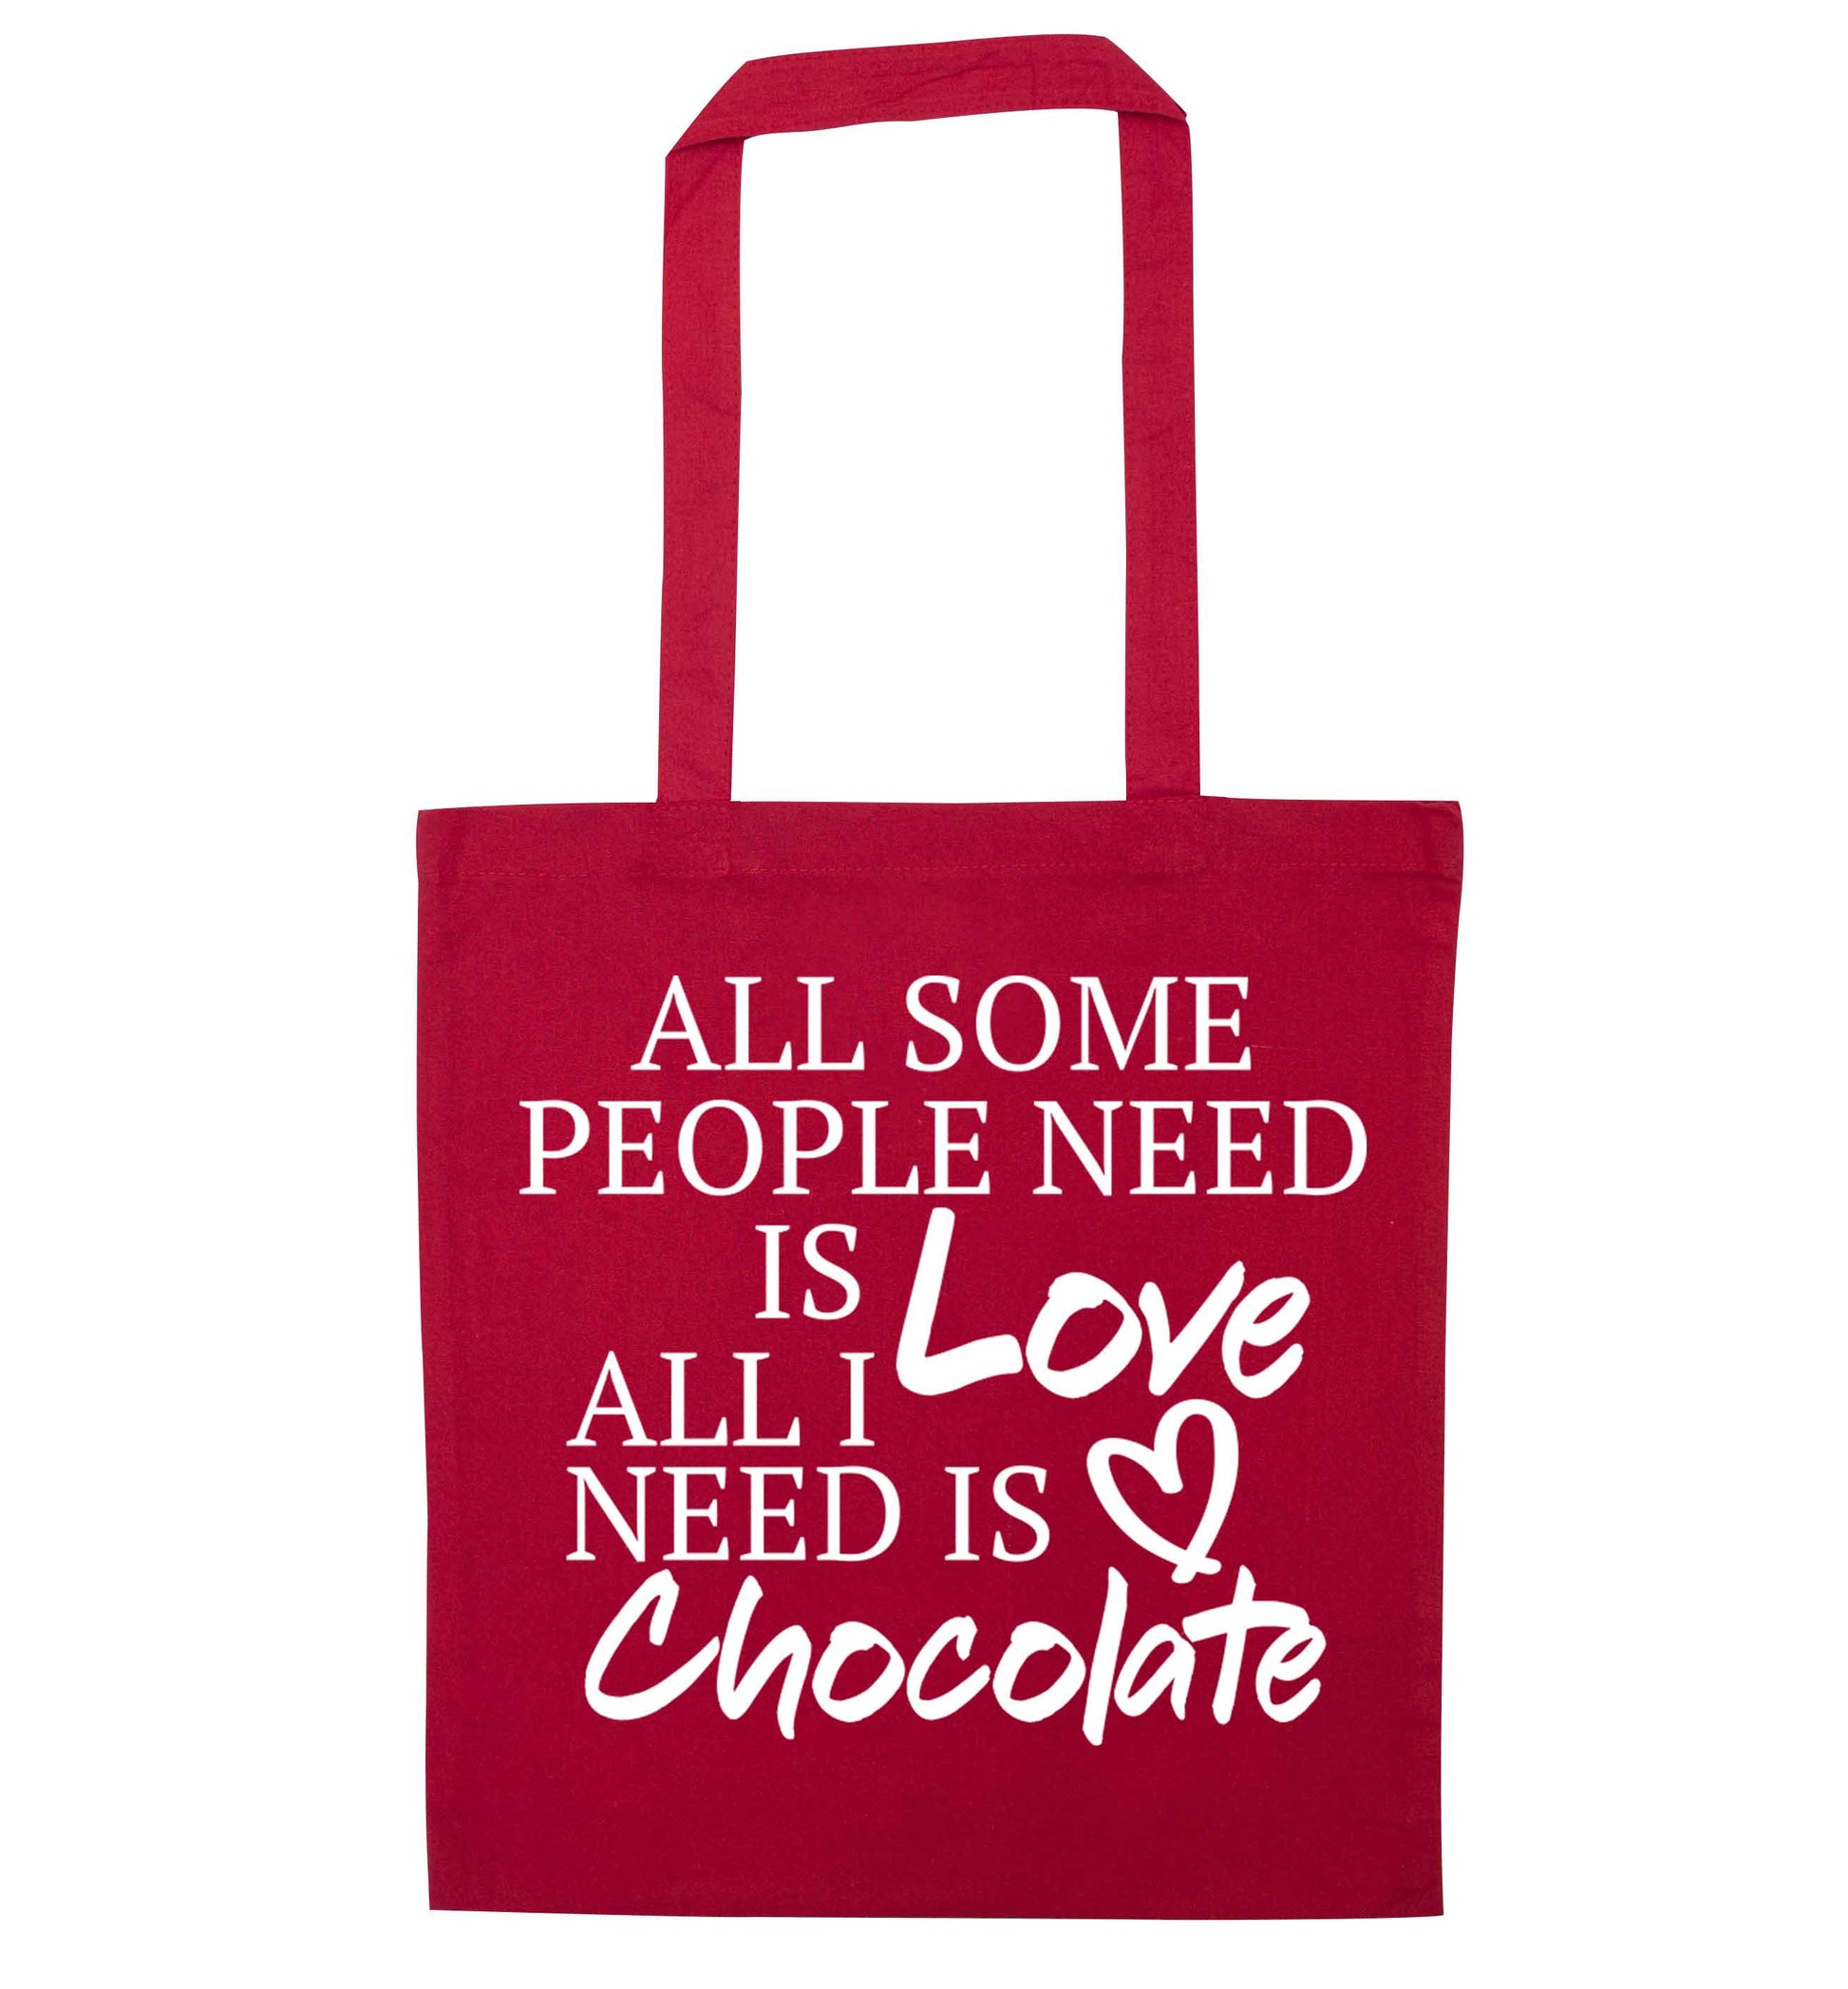 All some people need is love all I need is chocolate red tote bag